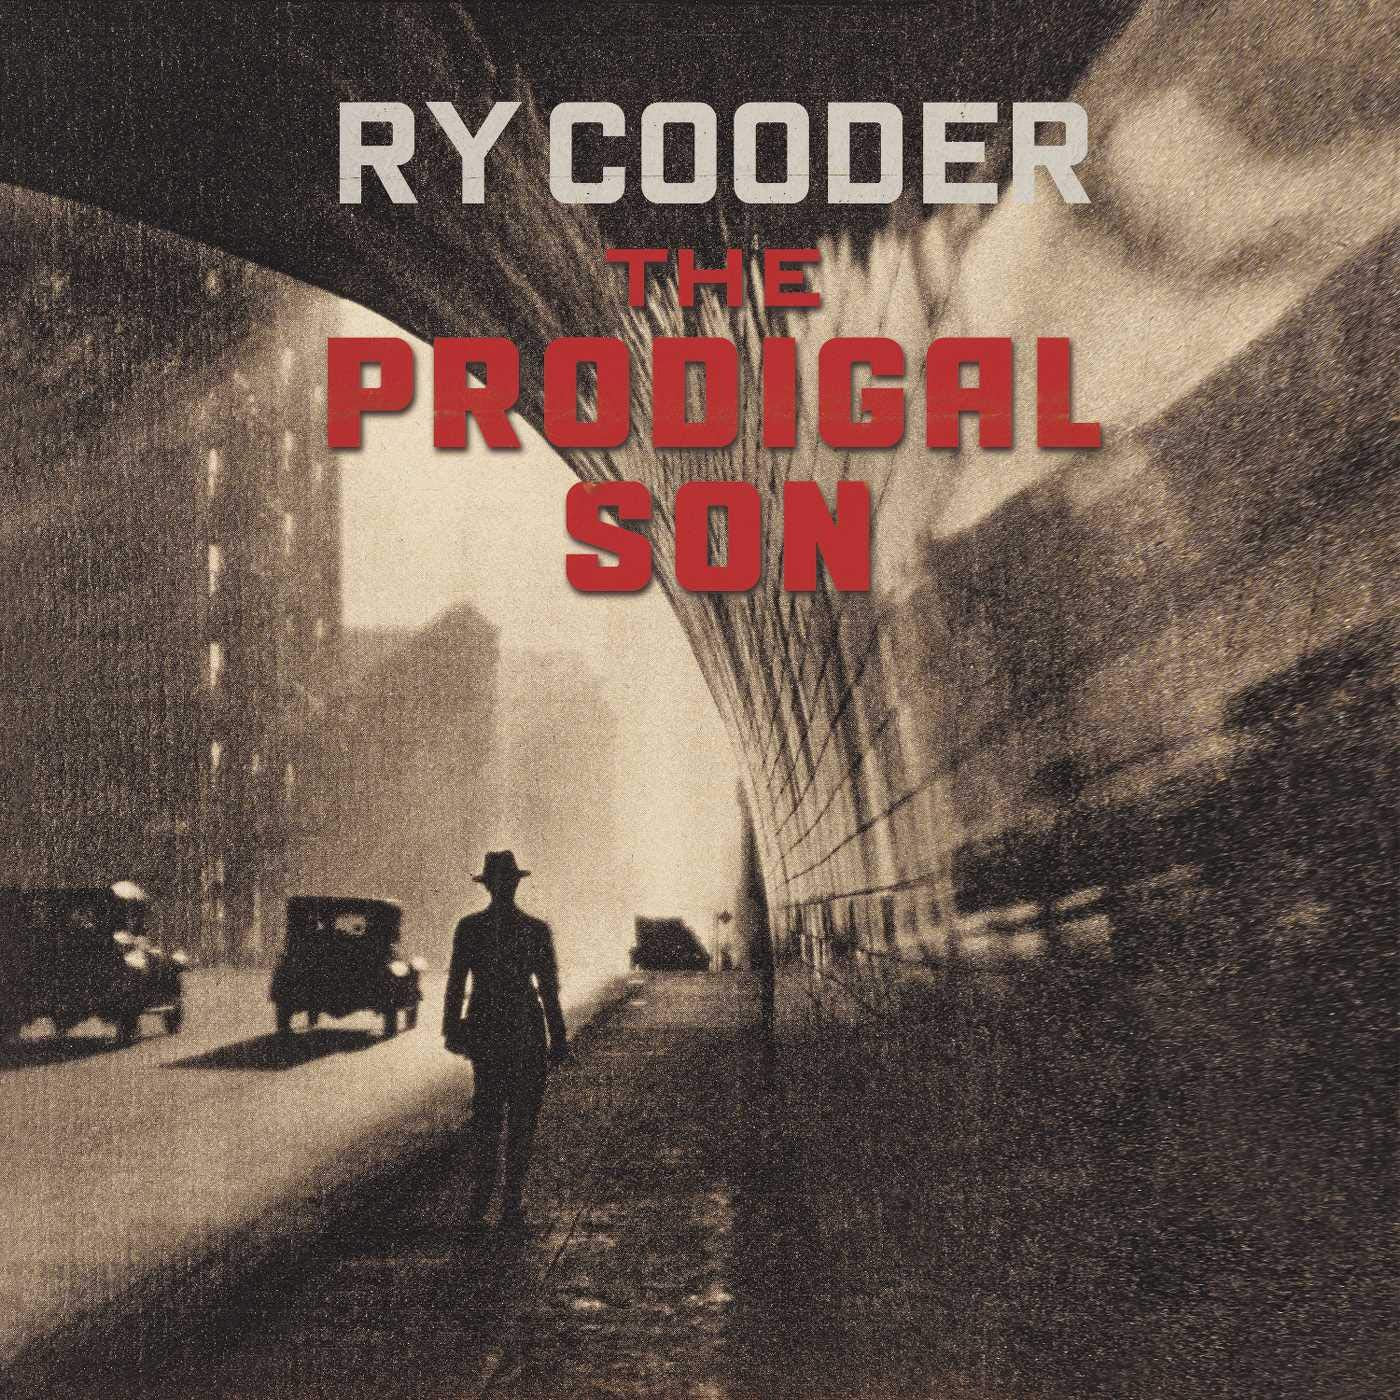 Cooder, Ry/The Prodigal Son [LP]